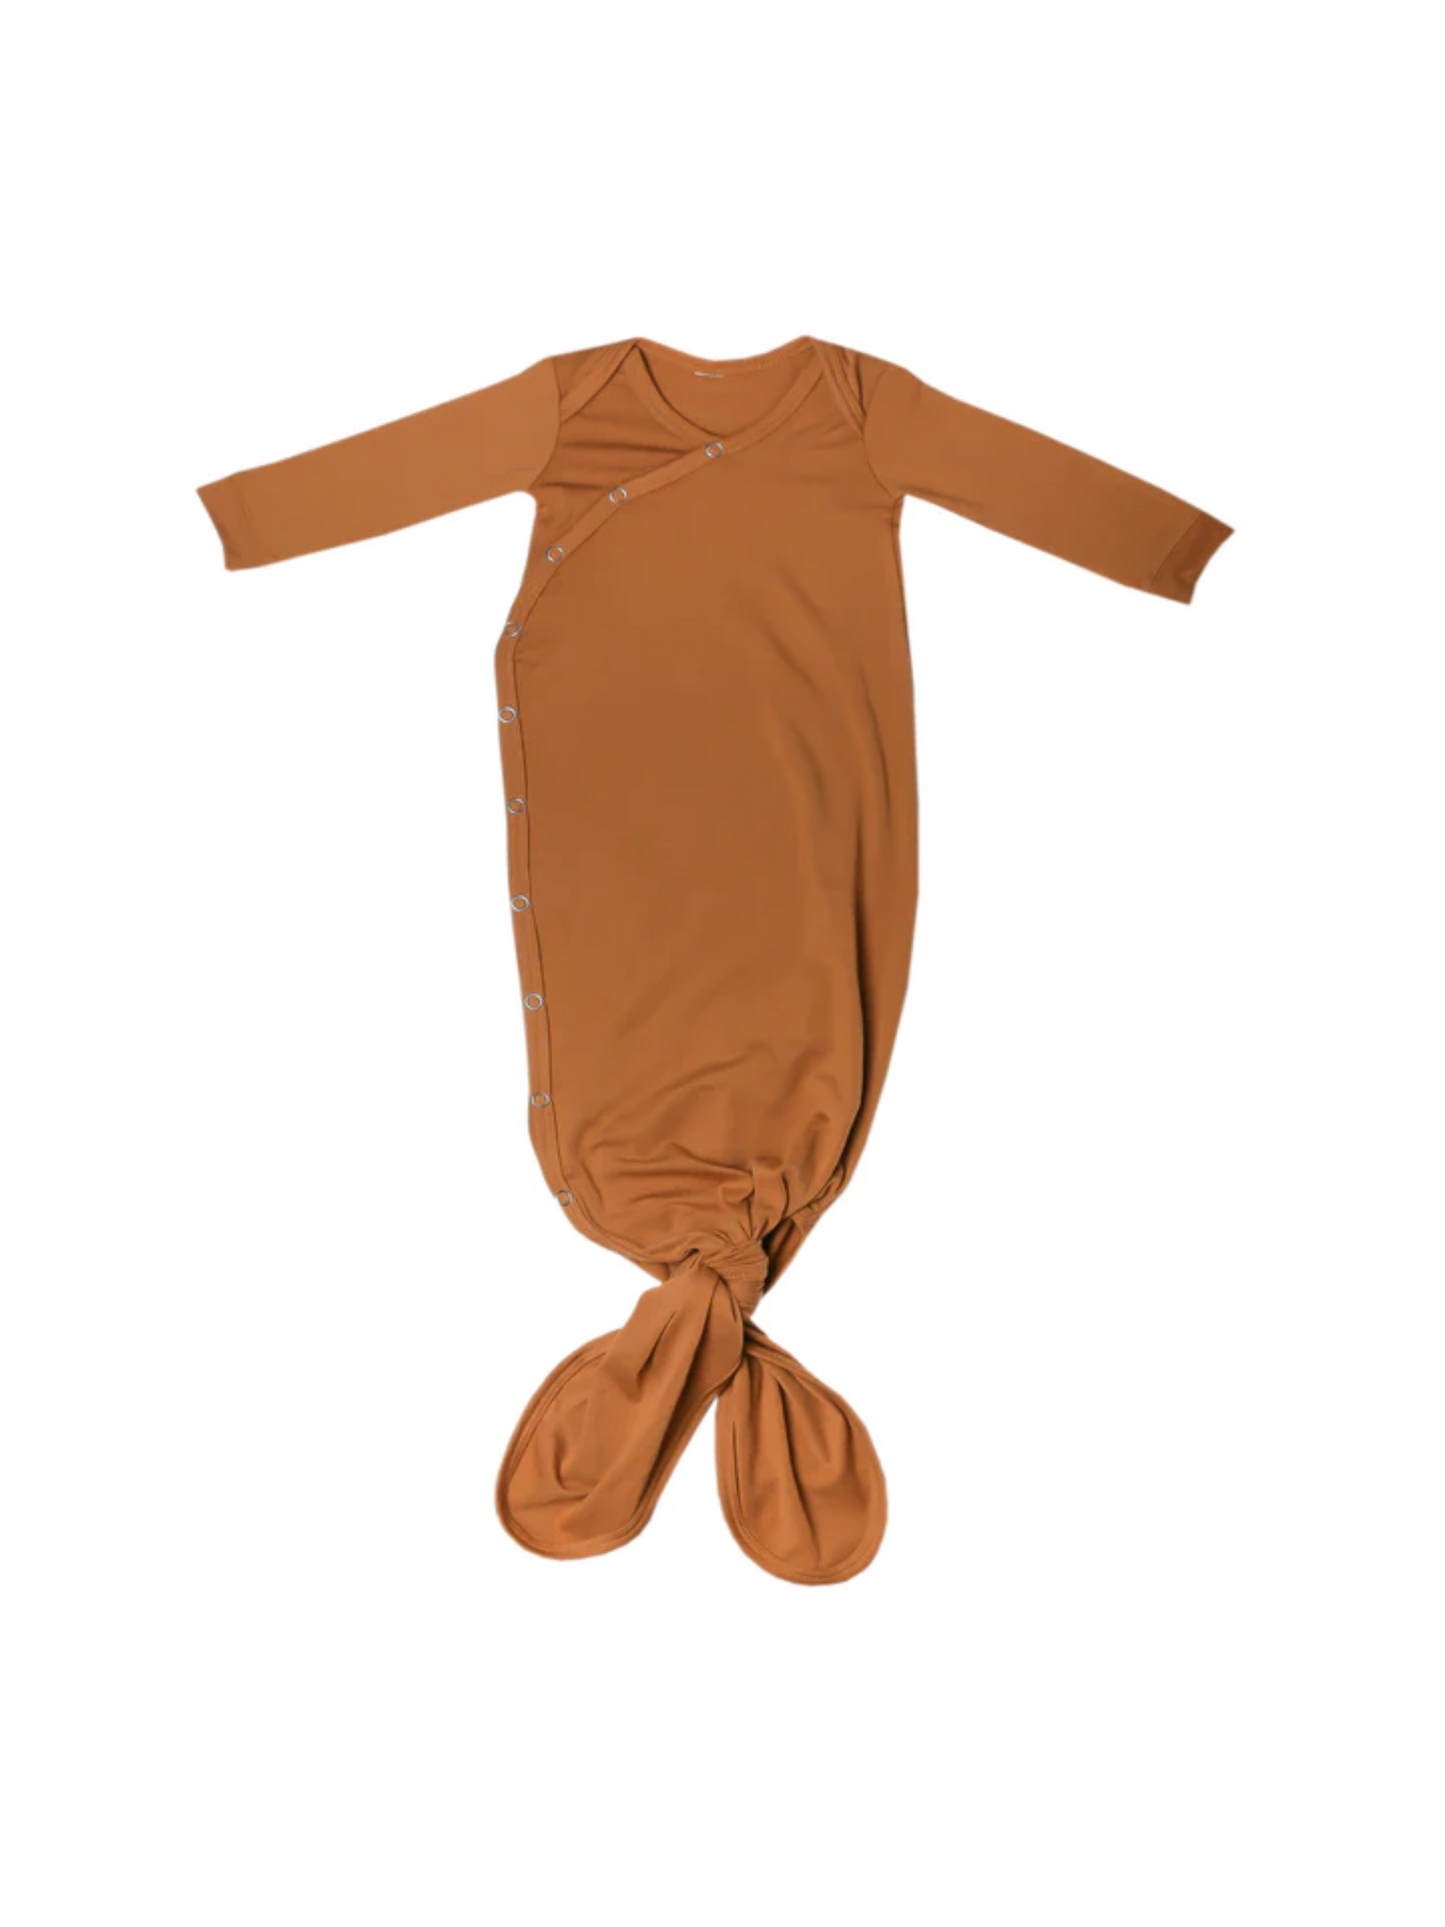 COPPER PEARL KNOTTED GOWN IN CAMEL - THE LITTLE EAGLE BOUTIQUE